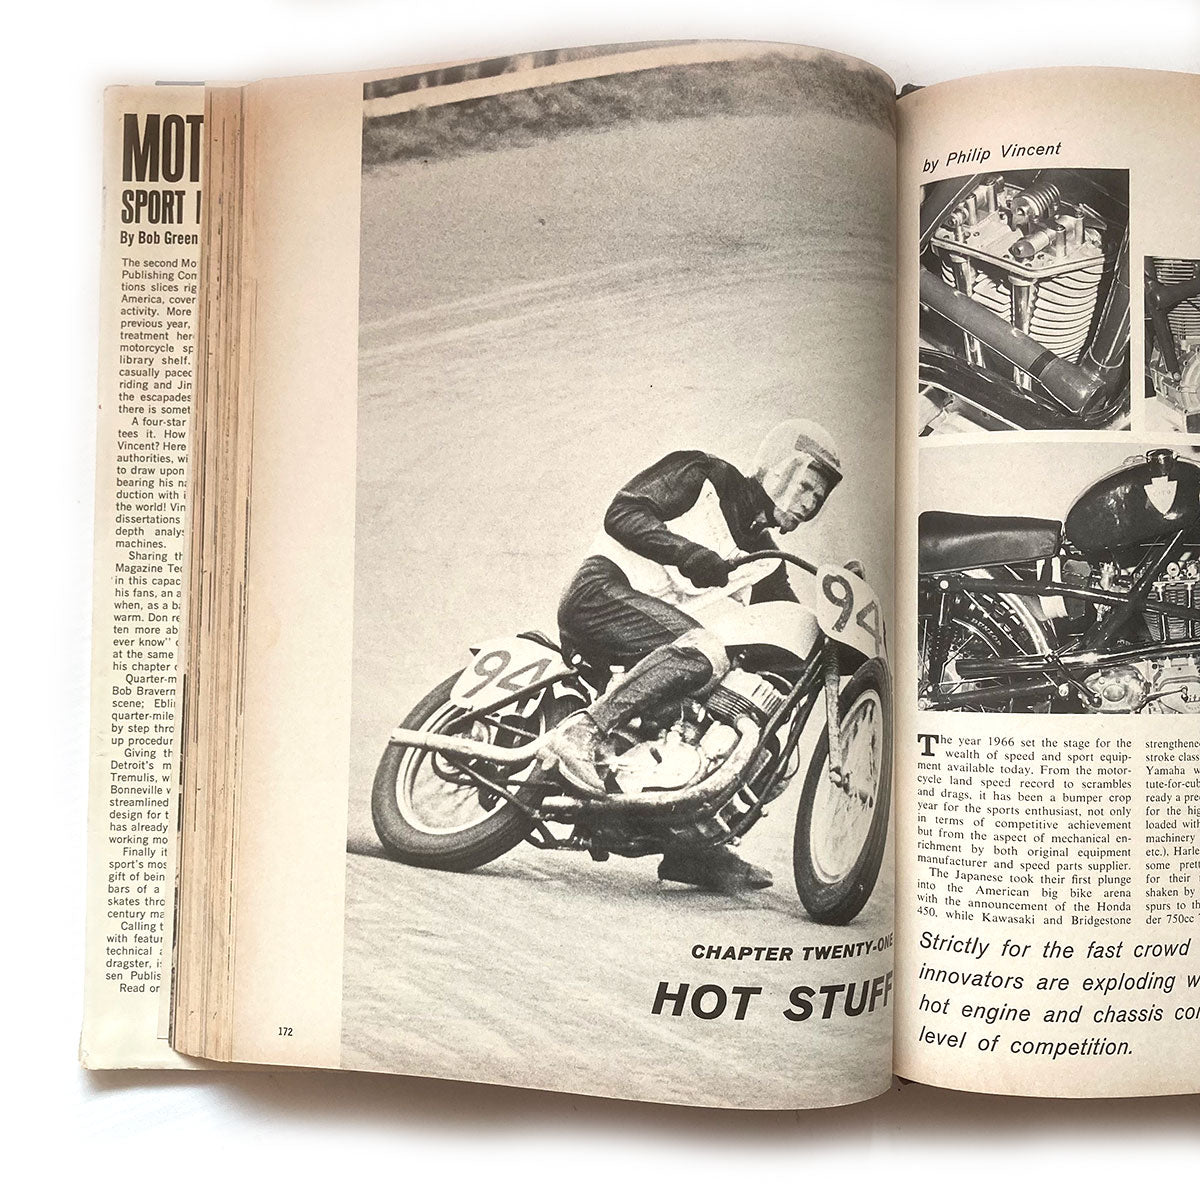 Motorcycle Sport Book no.2, 1967, hardback, complete with dust jacket